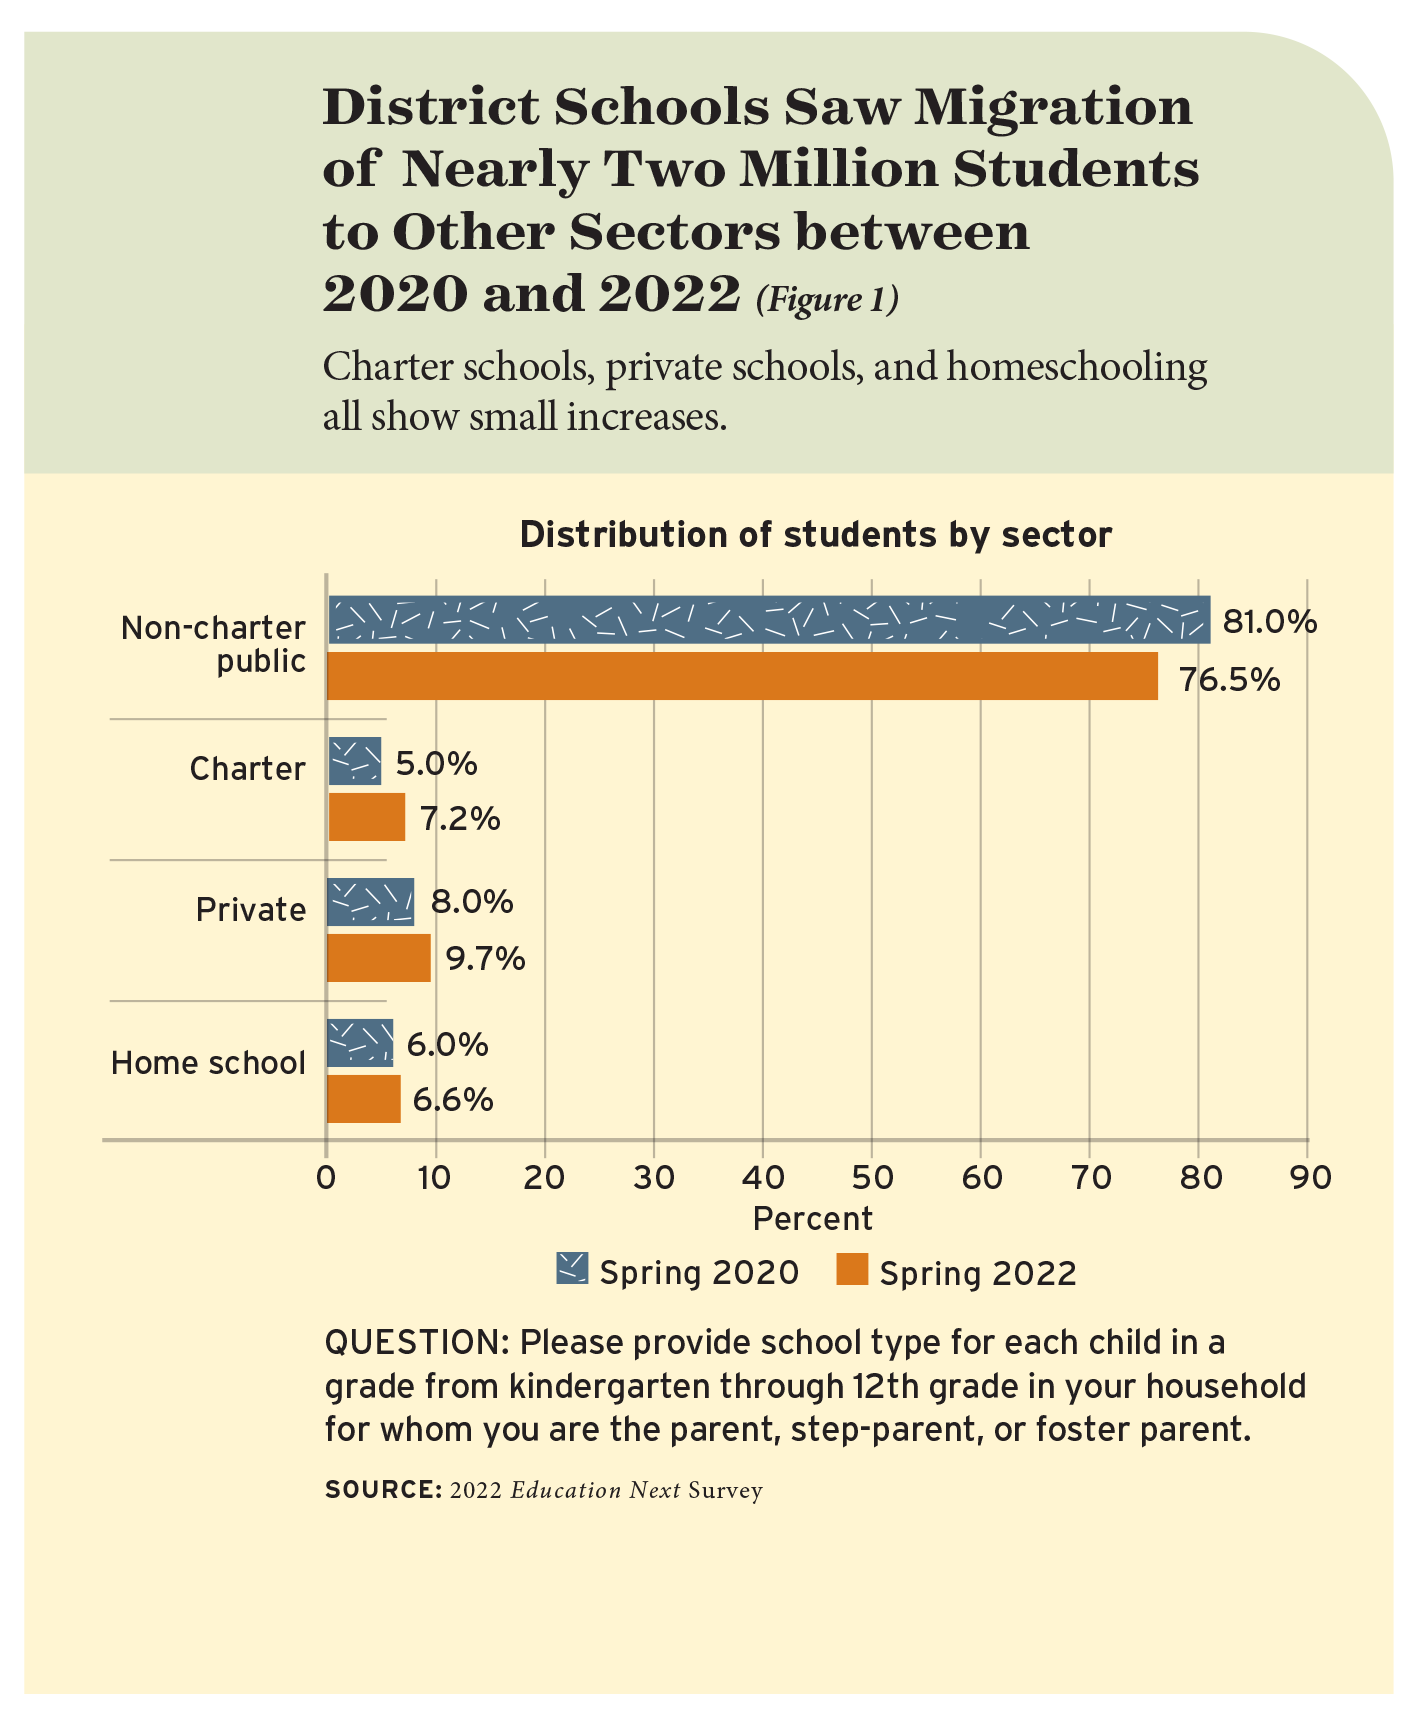 District Schools Saw Migration of Nearly Two Million Students to Other Sectors between 2020 and 2022 (Figure 1)